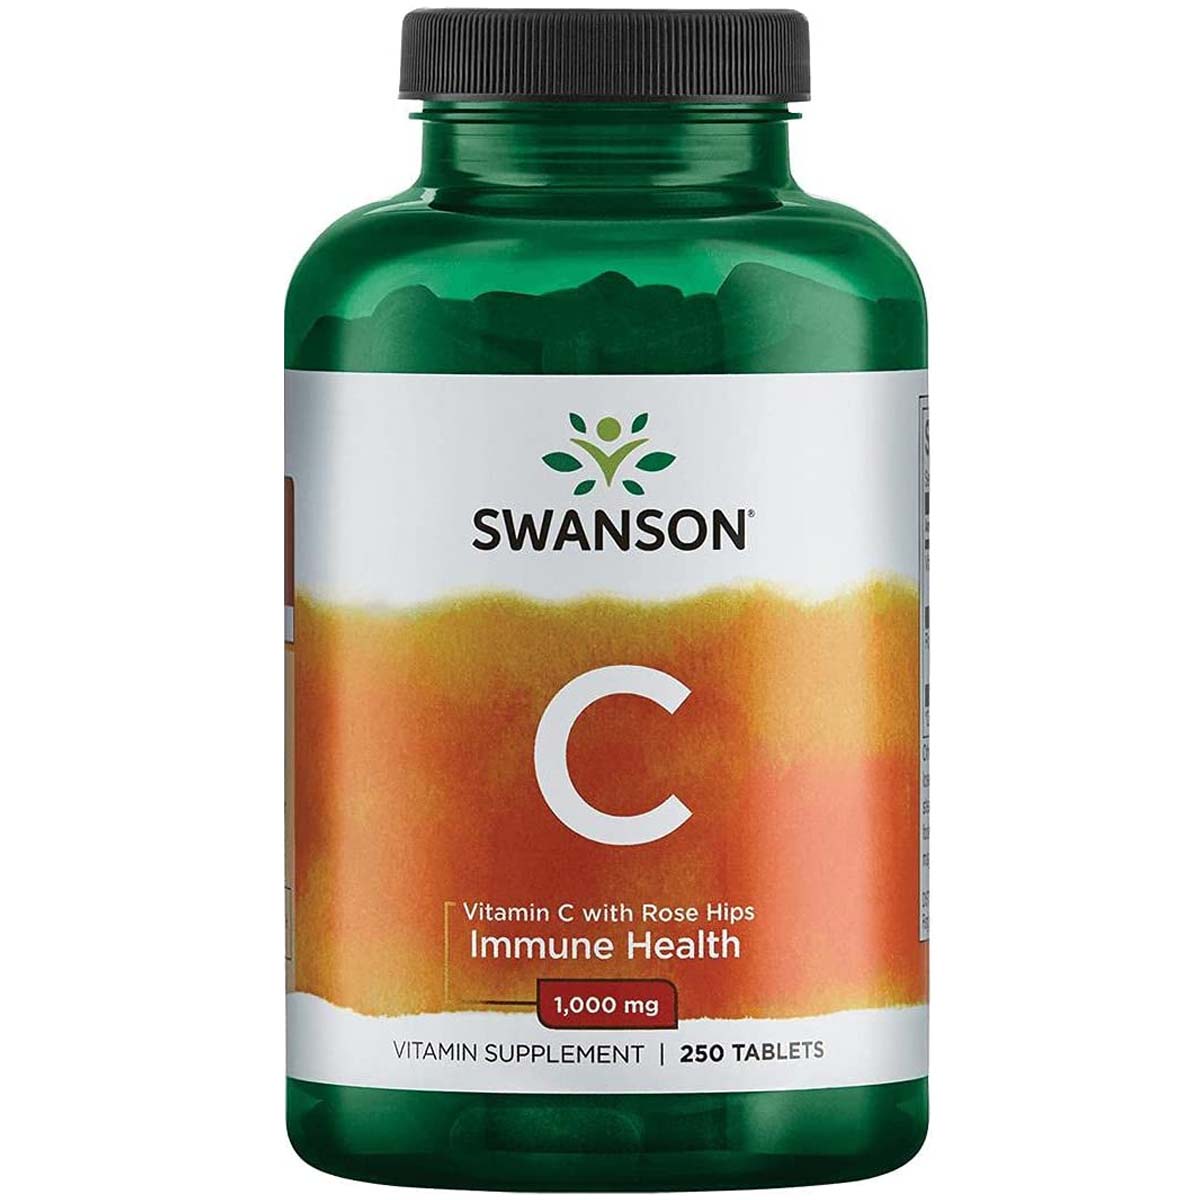 Swanson Vitamin C with Rose Hips 250 Tablets 1000 mg